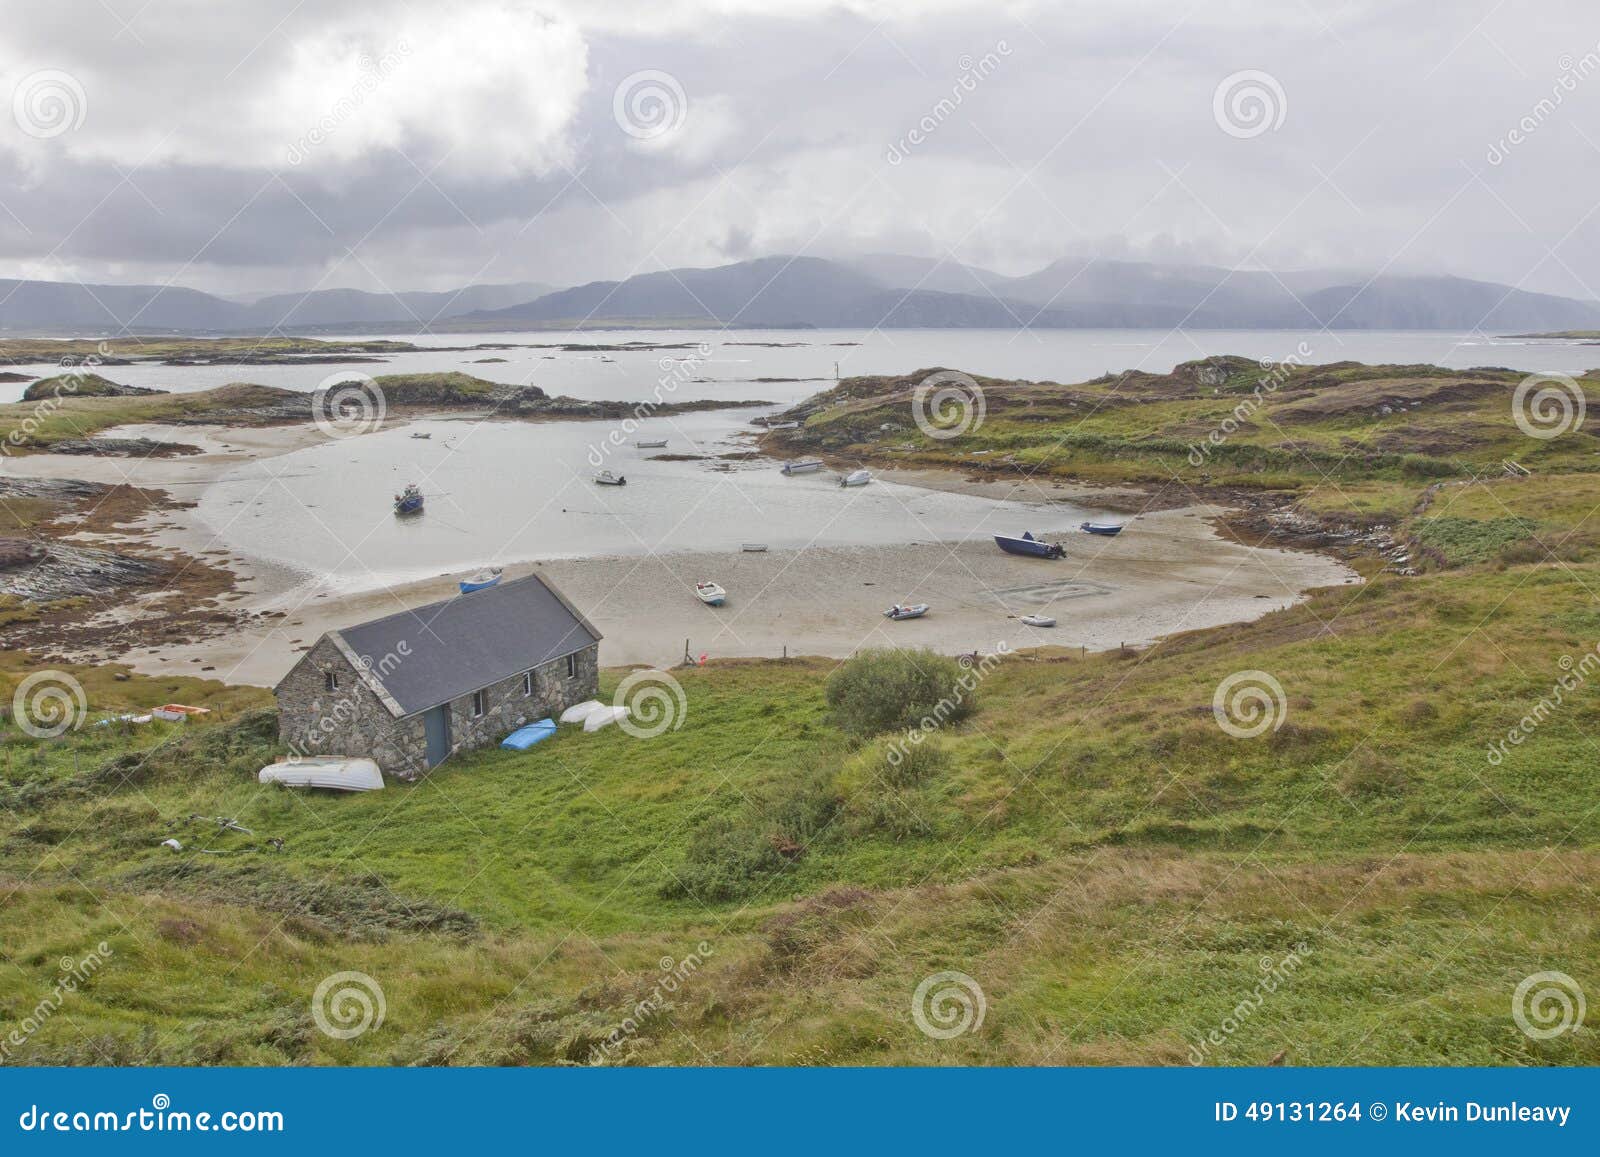 A Small Secluded Bay In Ireland Stock Photo - Image: 49131264